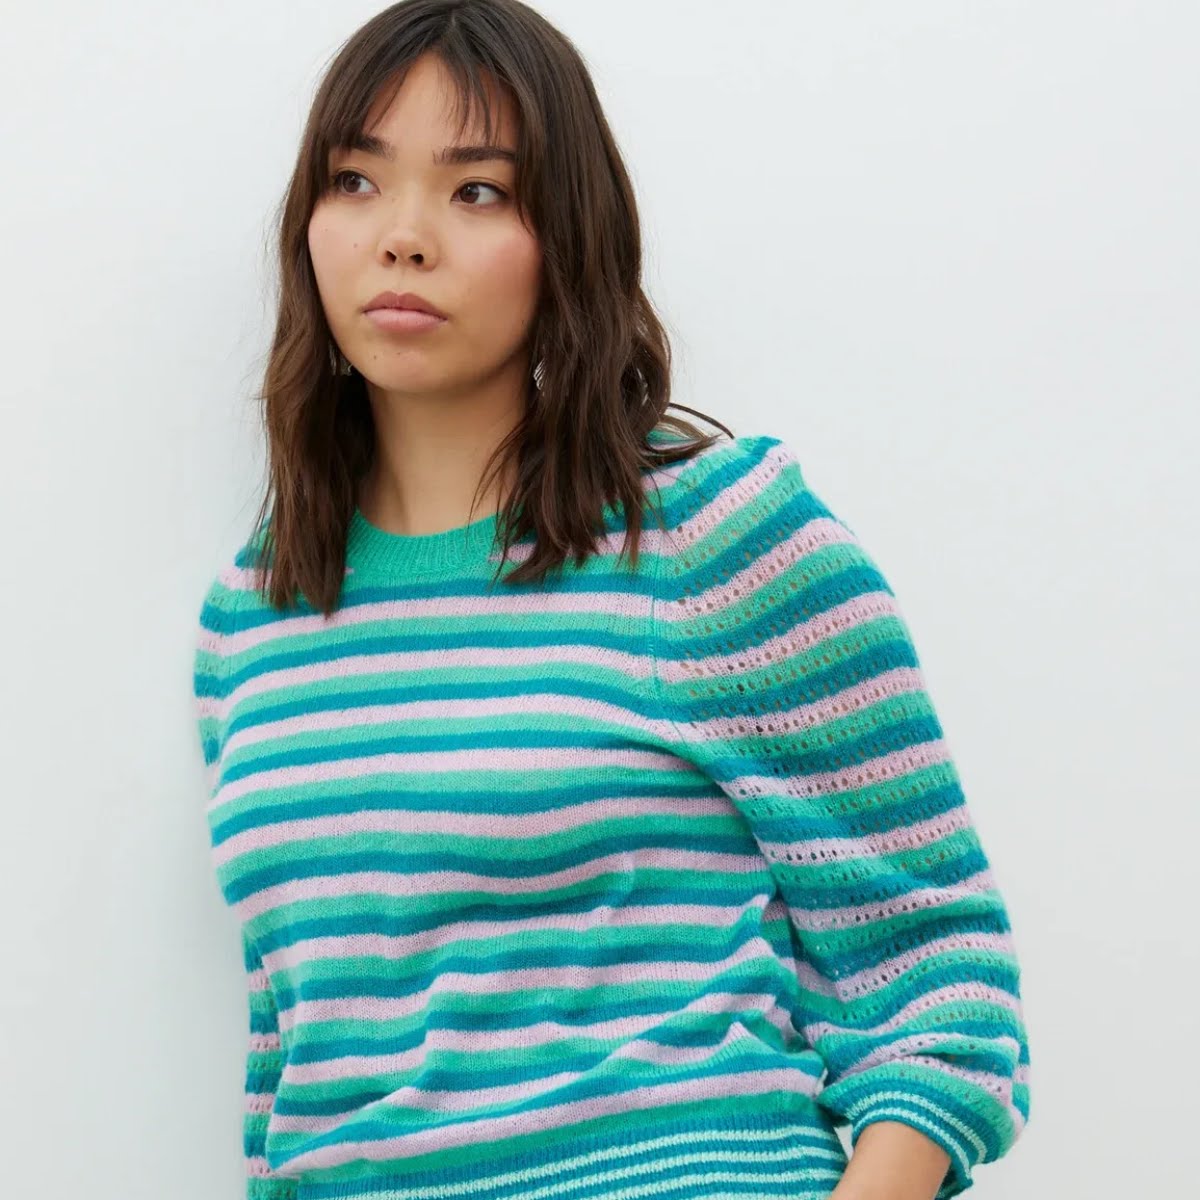 Green & Pink Striped Knitted Top, €66, Oliver Bonas